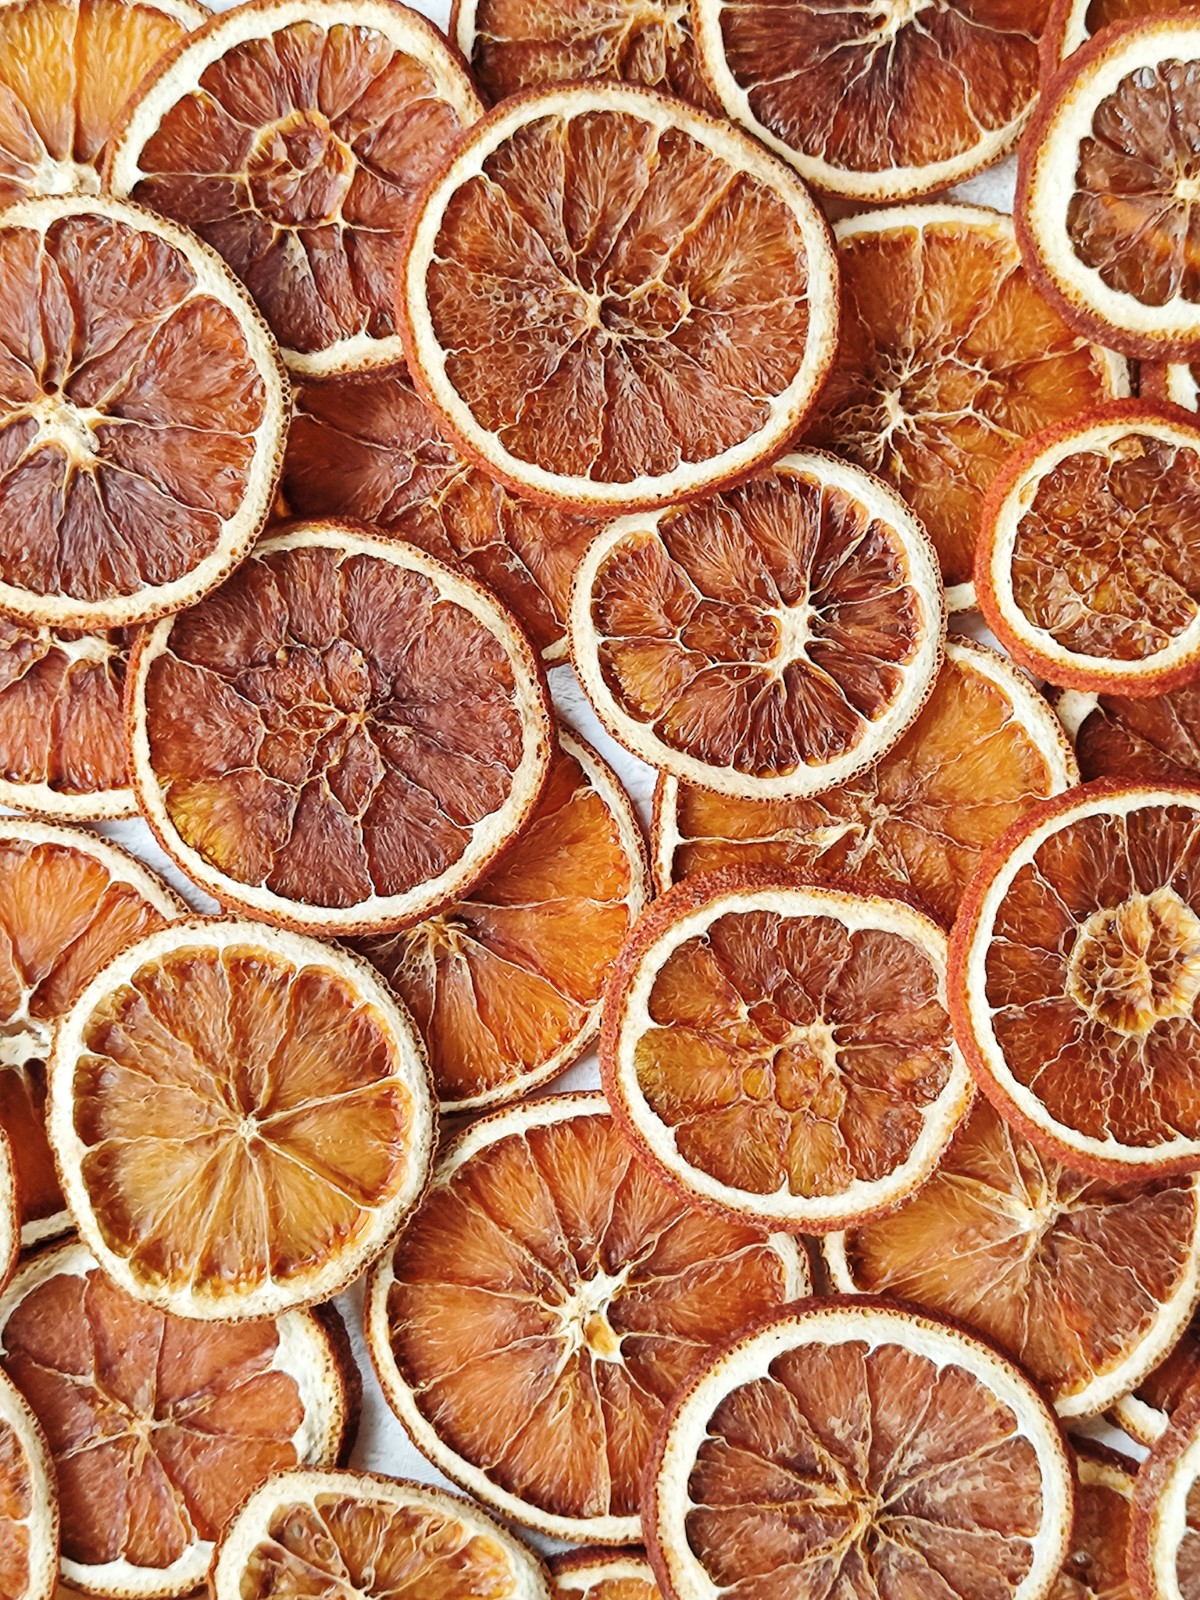 Dehydrated Oranges - dehydrated citrus